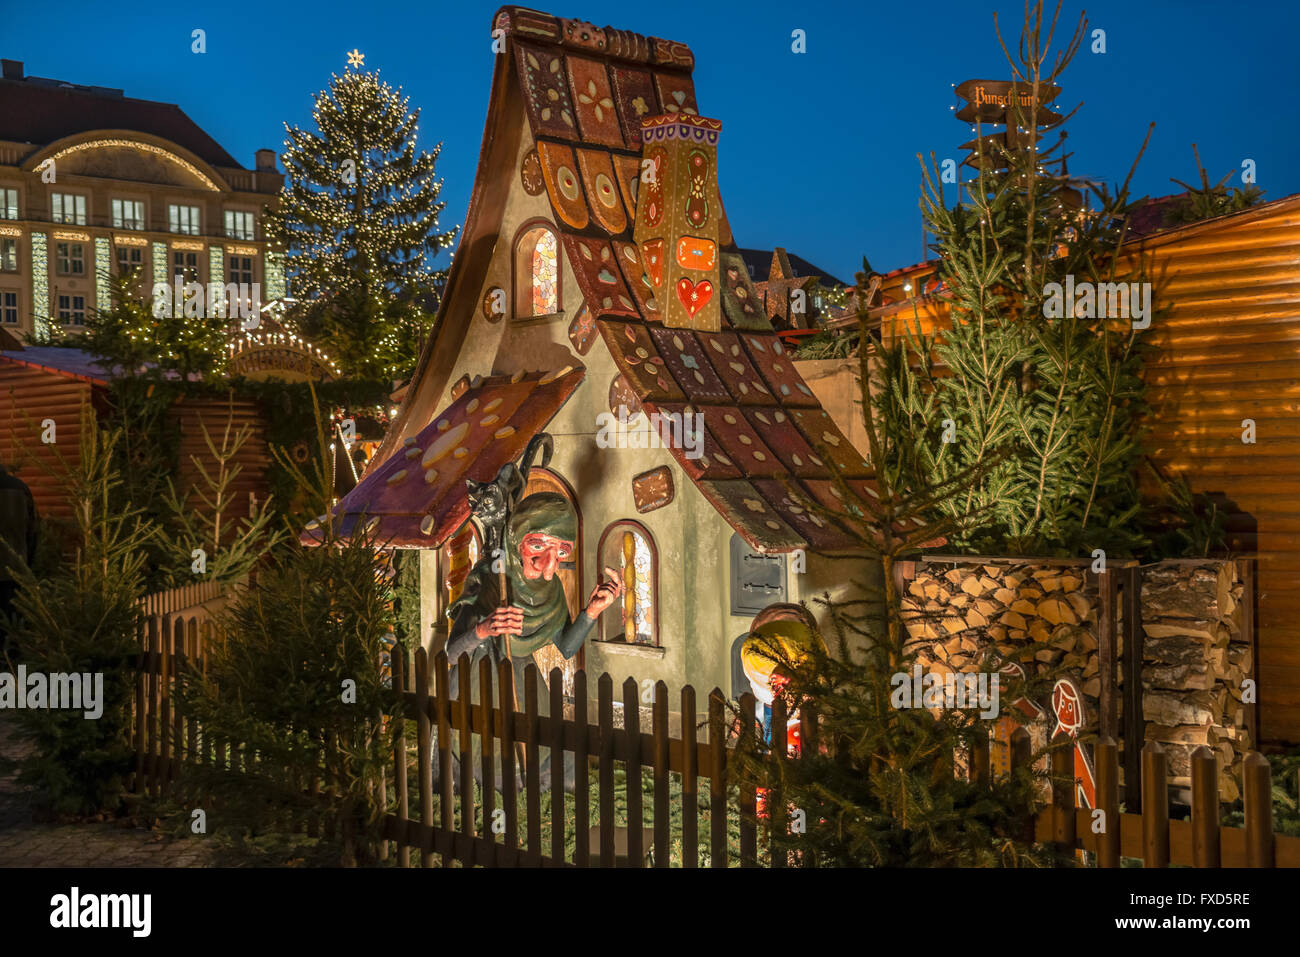 Gingerbread Cottage decoration at Dresden Christmas Market, Saxony, Germany Stock Photo